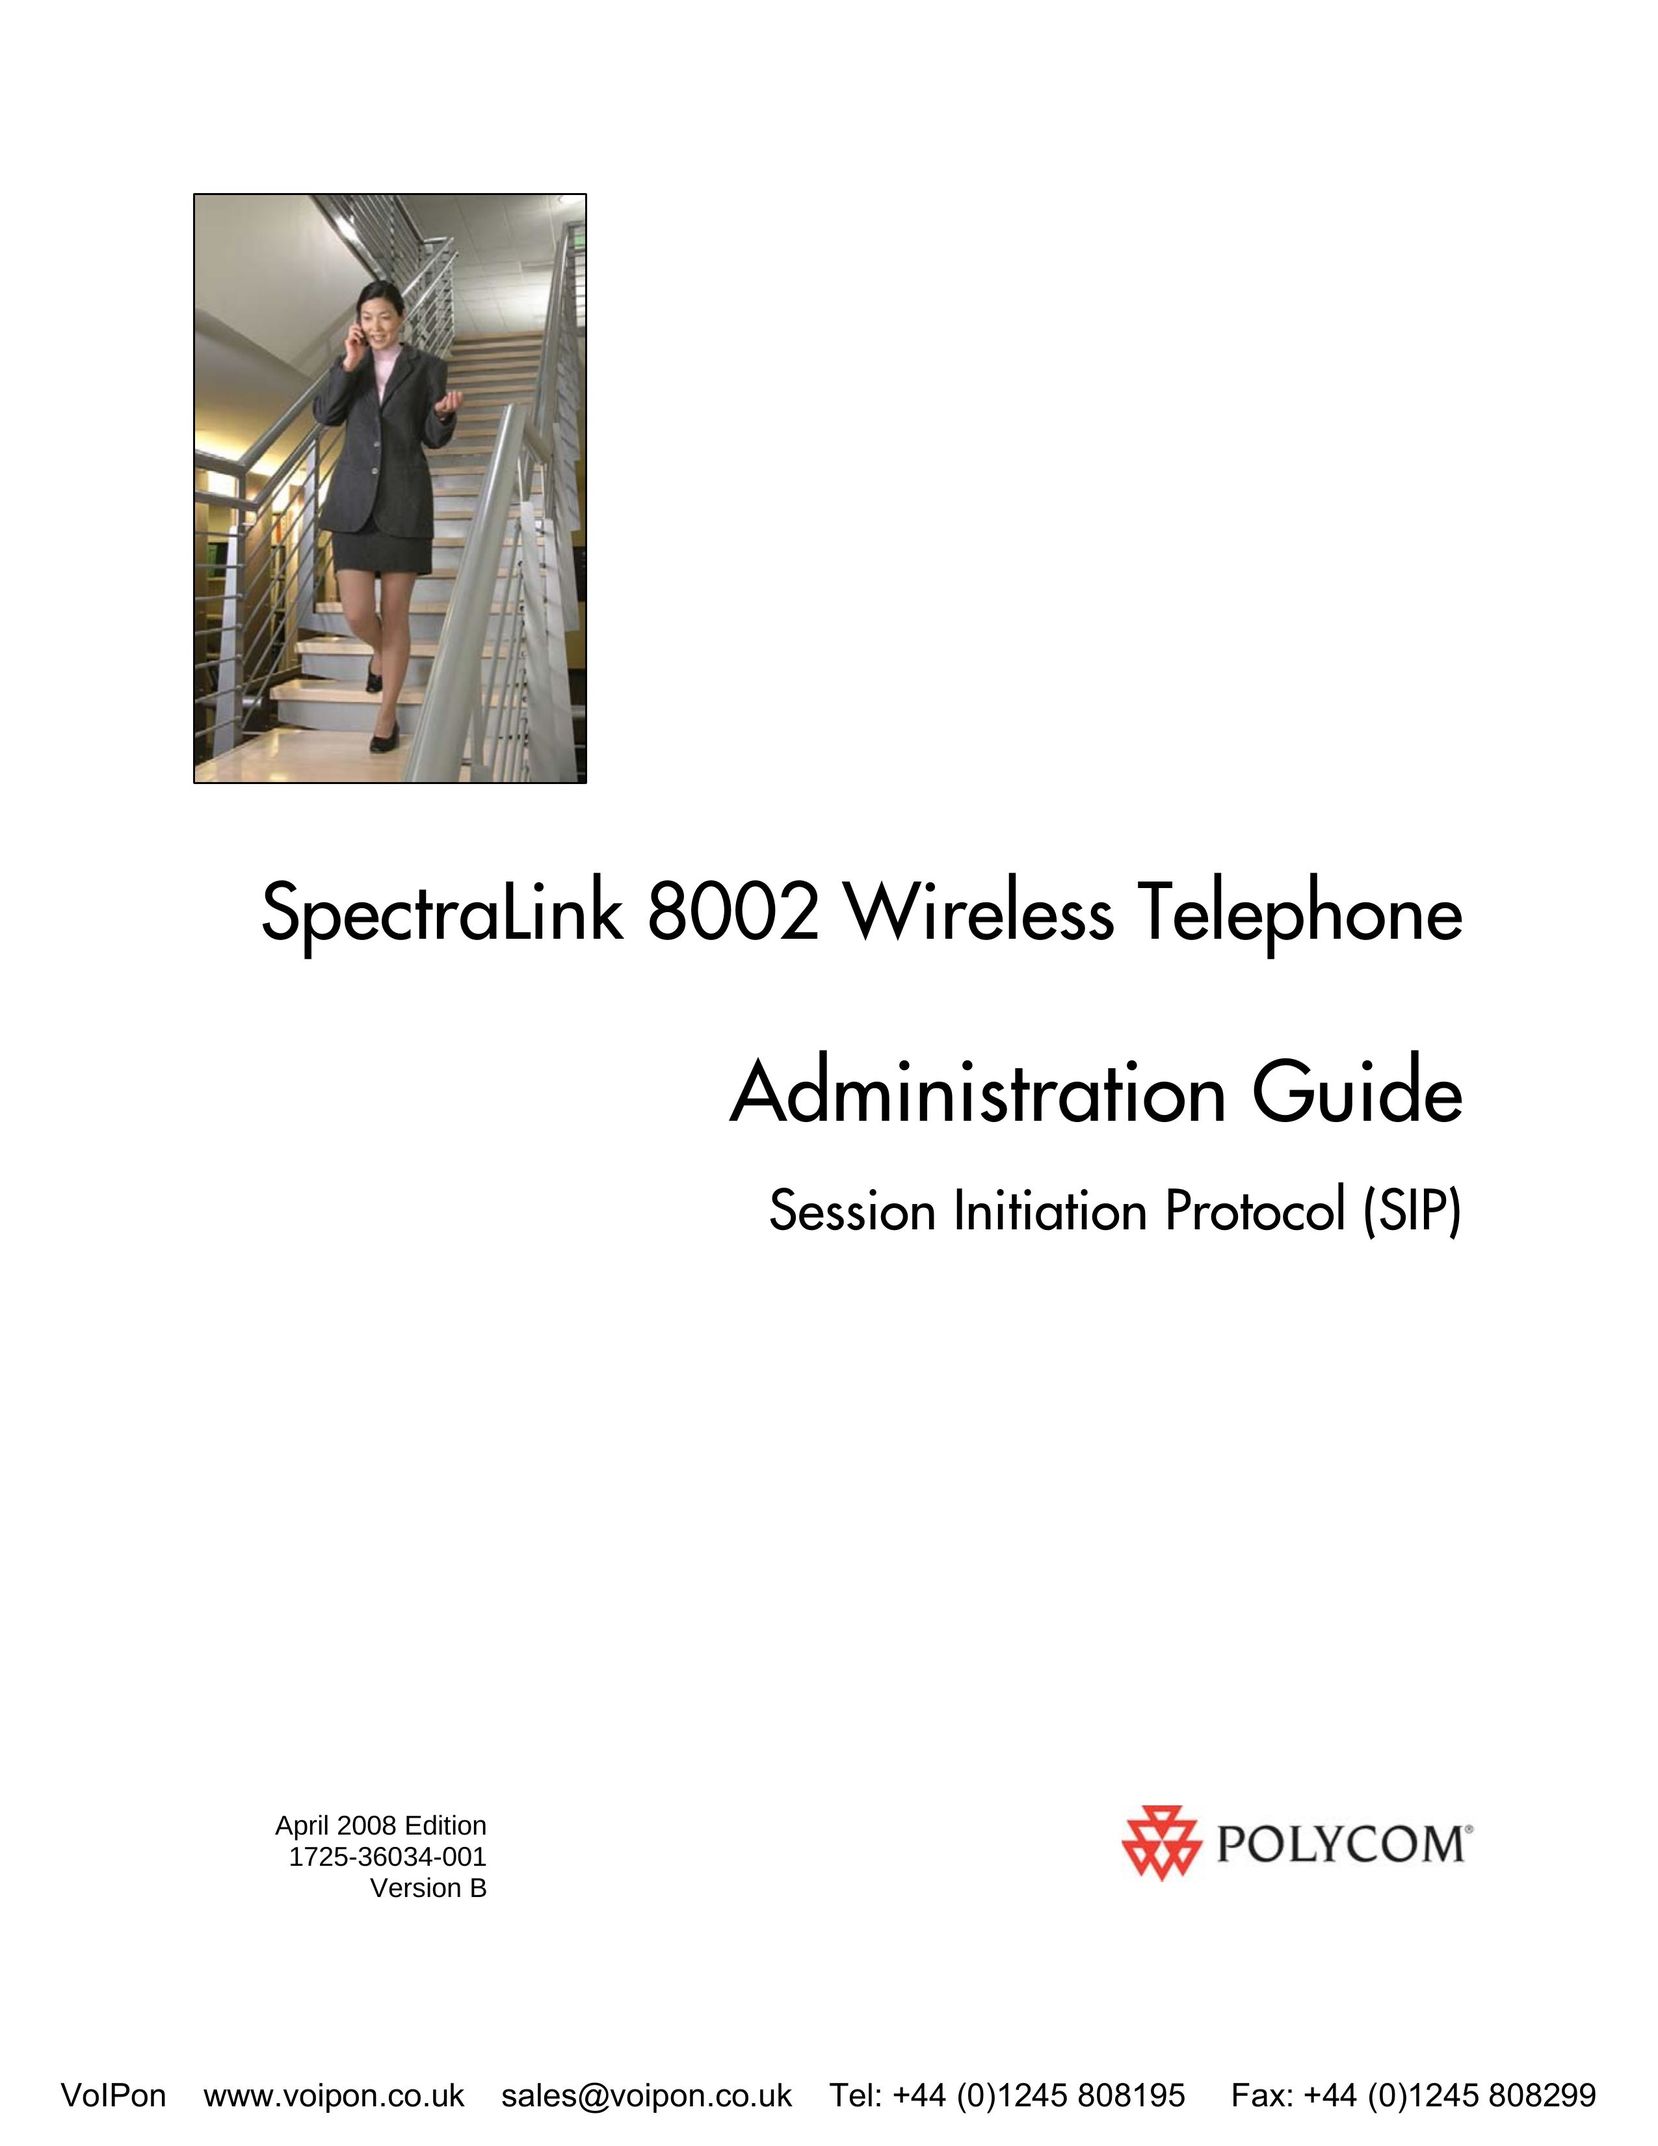 SpectraLink 8002 Cell Phone User Manual